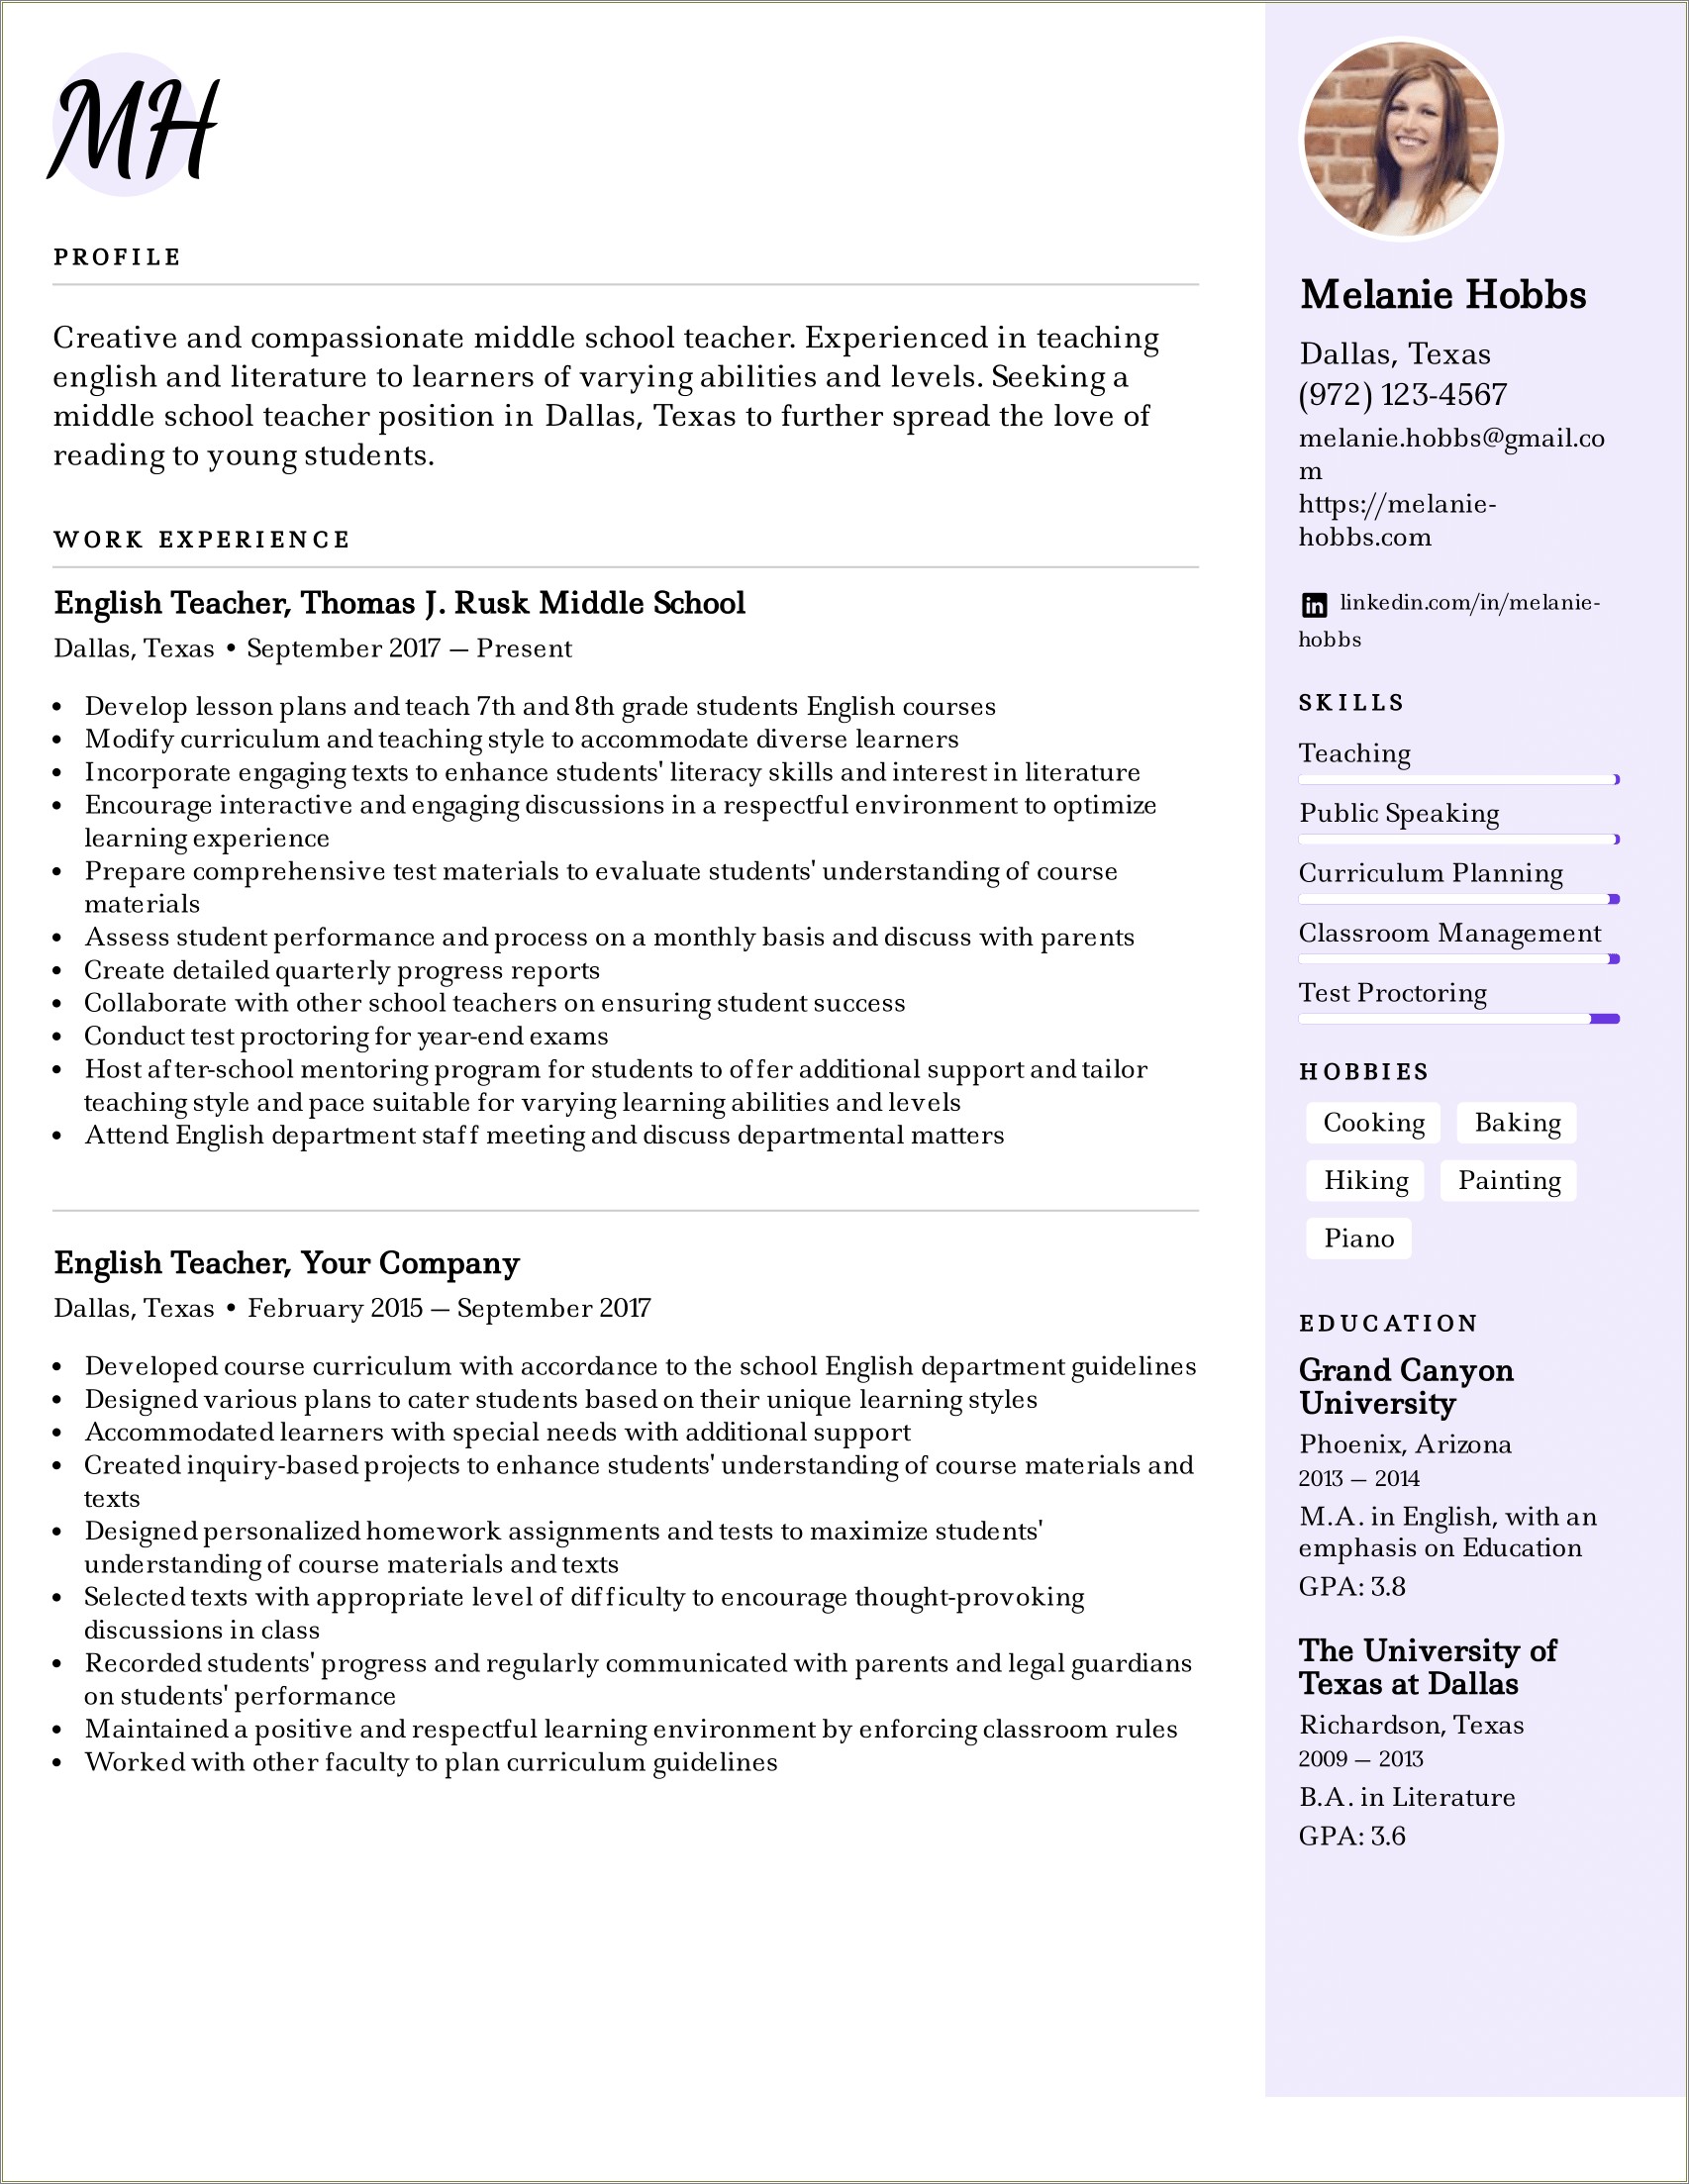 Resume For High School Guidance Counselor